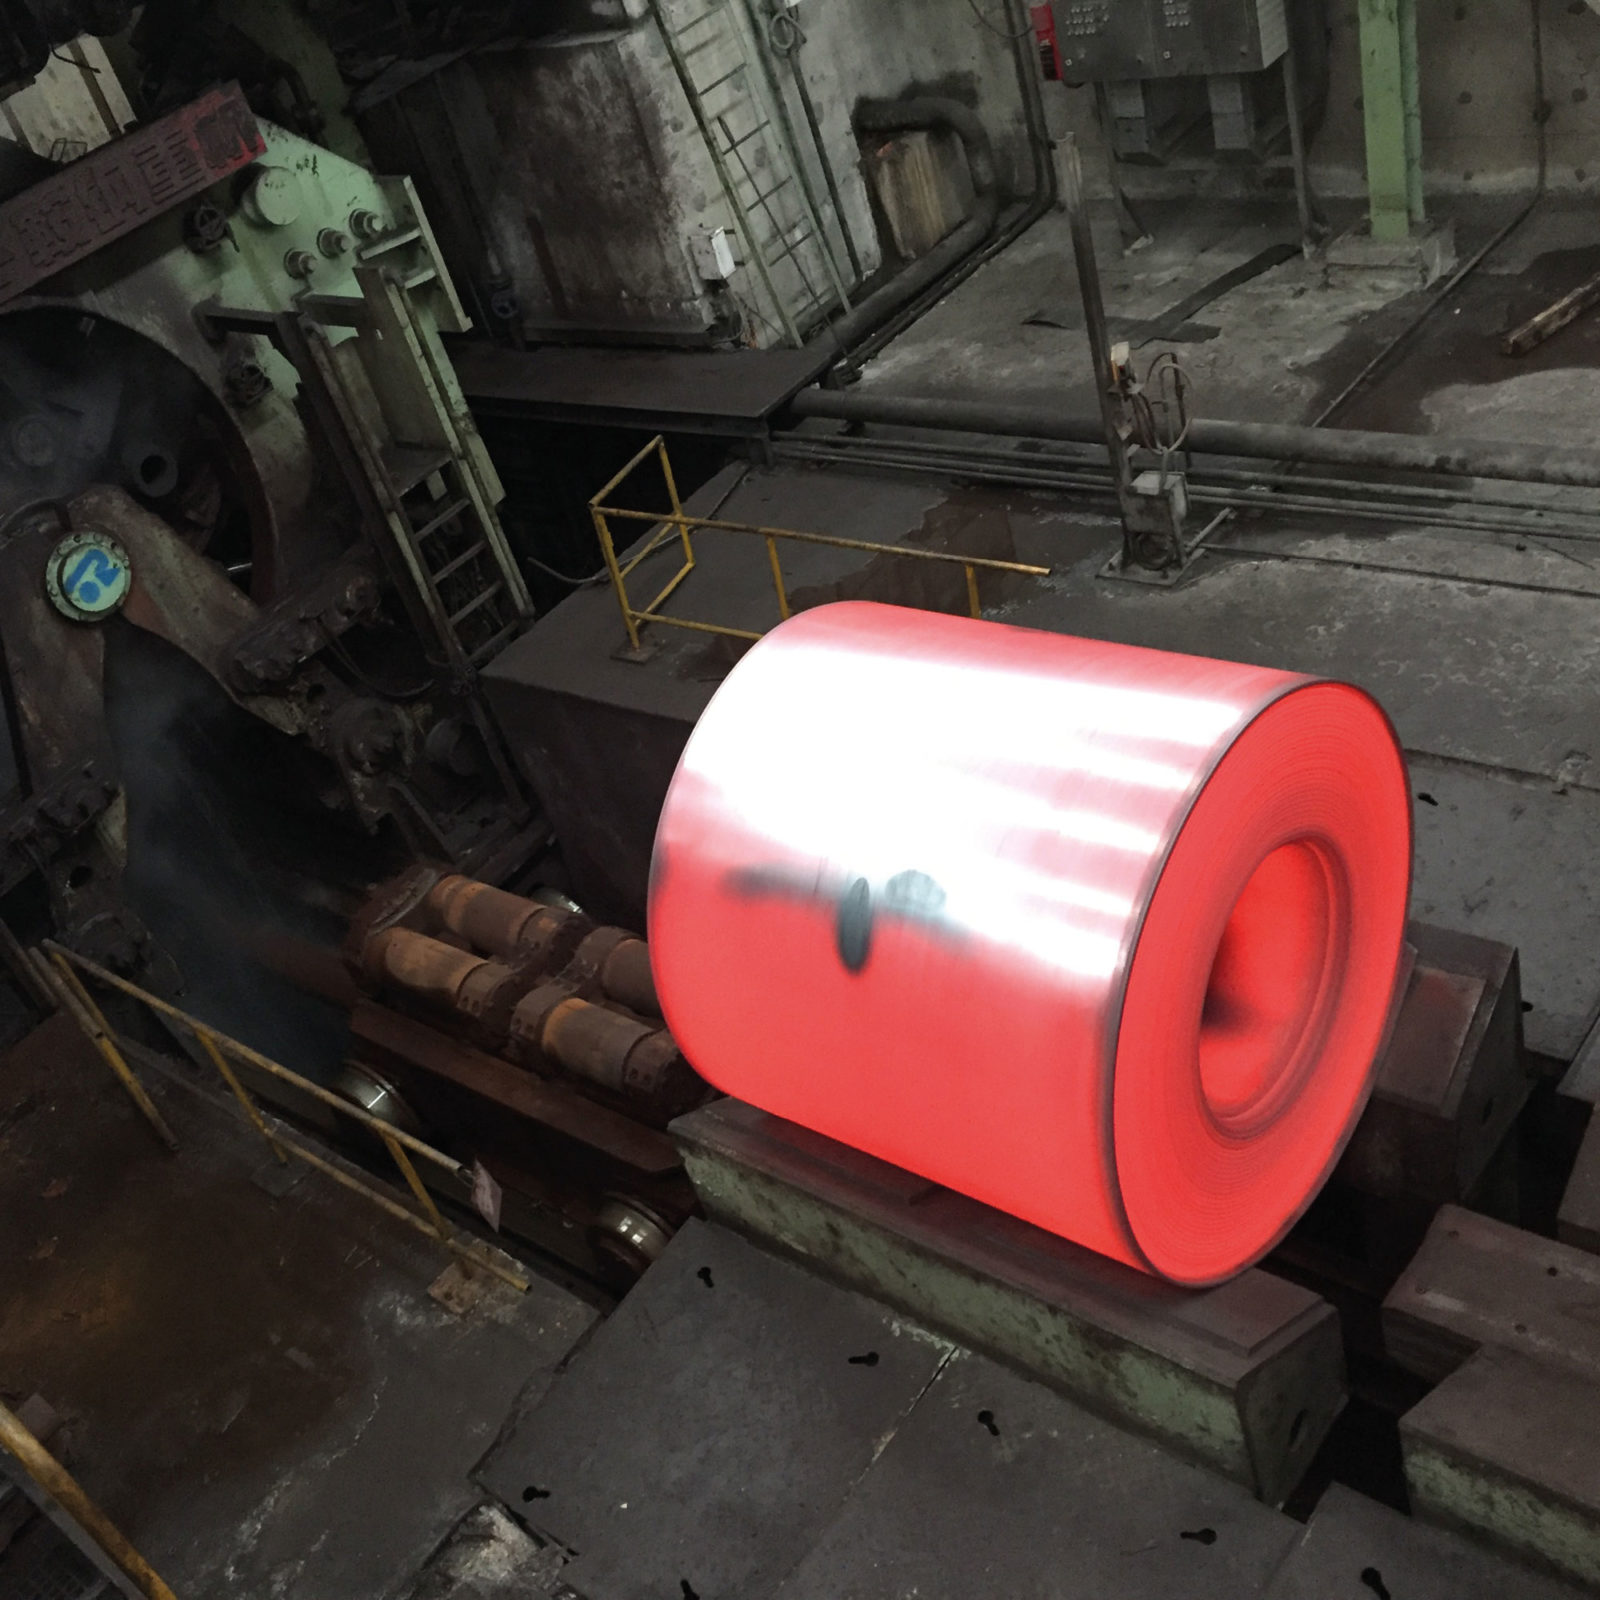 Red-hot spinning spool in industrial machine.